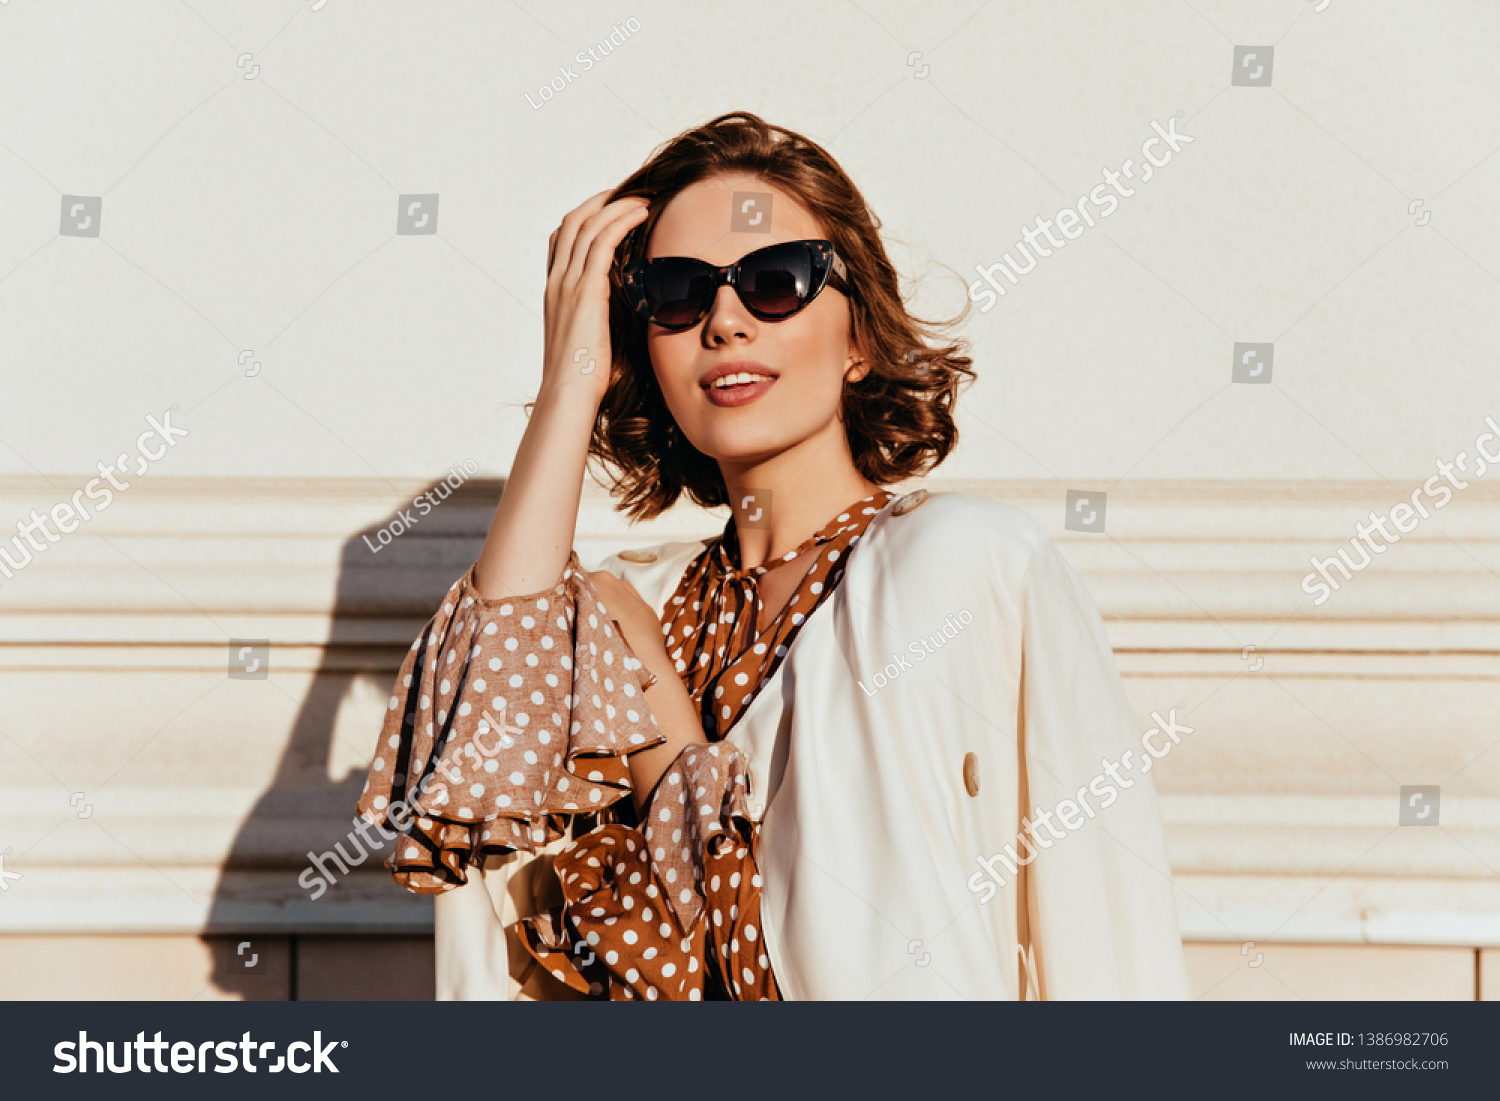 Lovely woman in vintage outfit expressing interest. Outdoor shot of glamorous happy girl in sunglasses. #1386982706